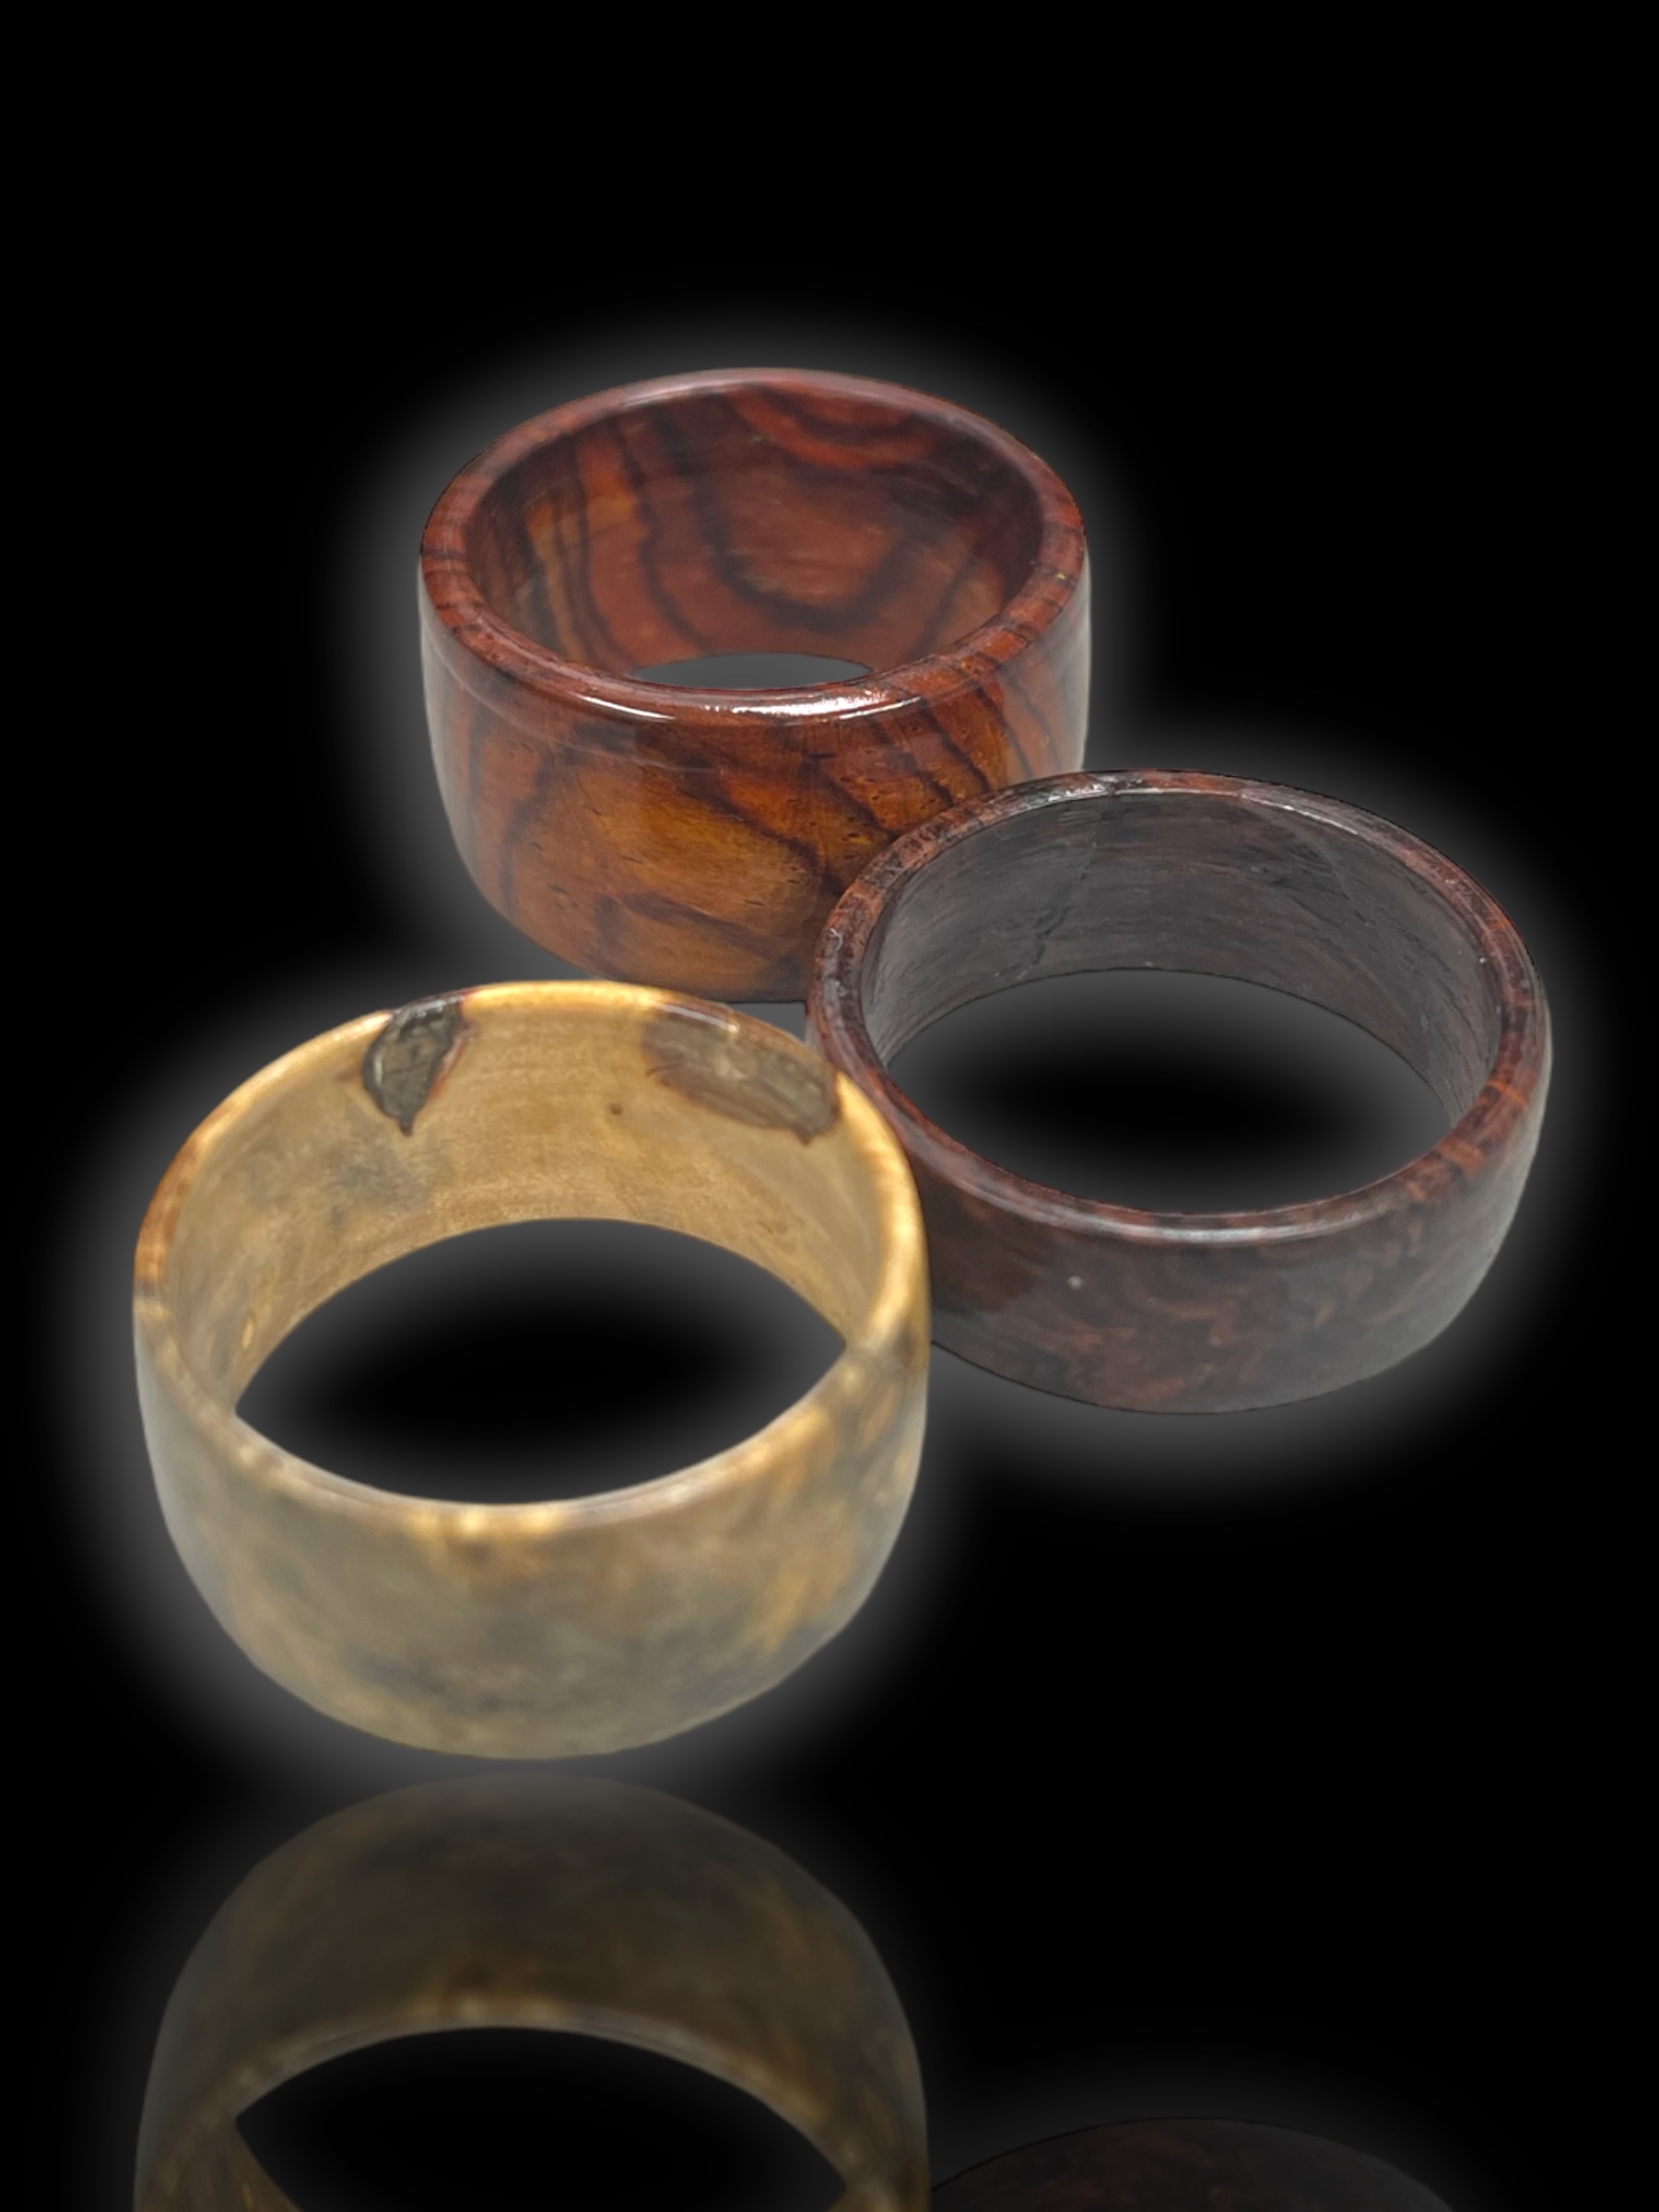 A Gift of Custom Burl Wood Ring from My Customer